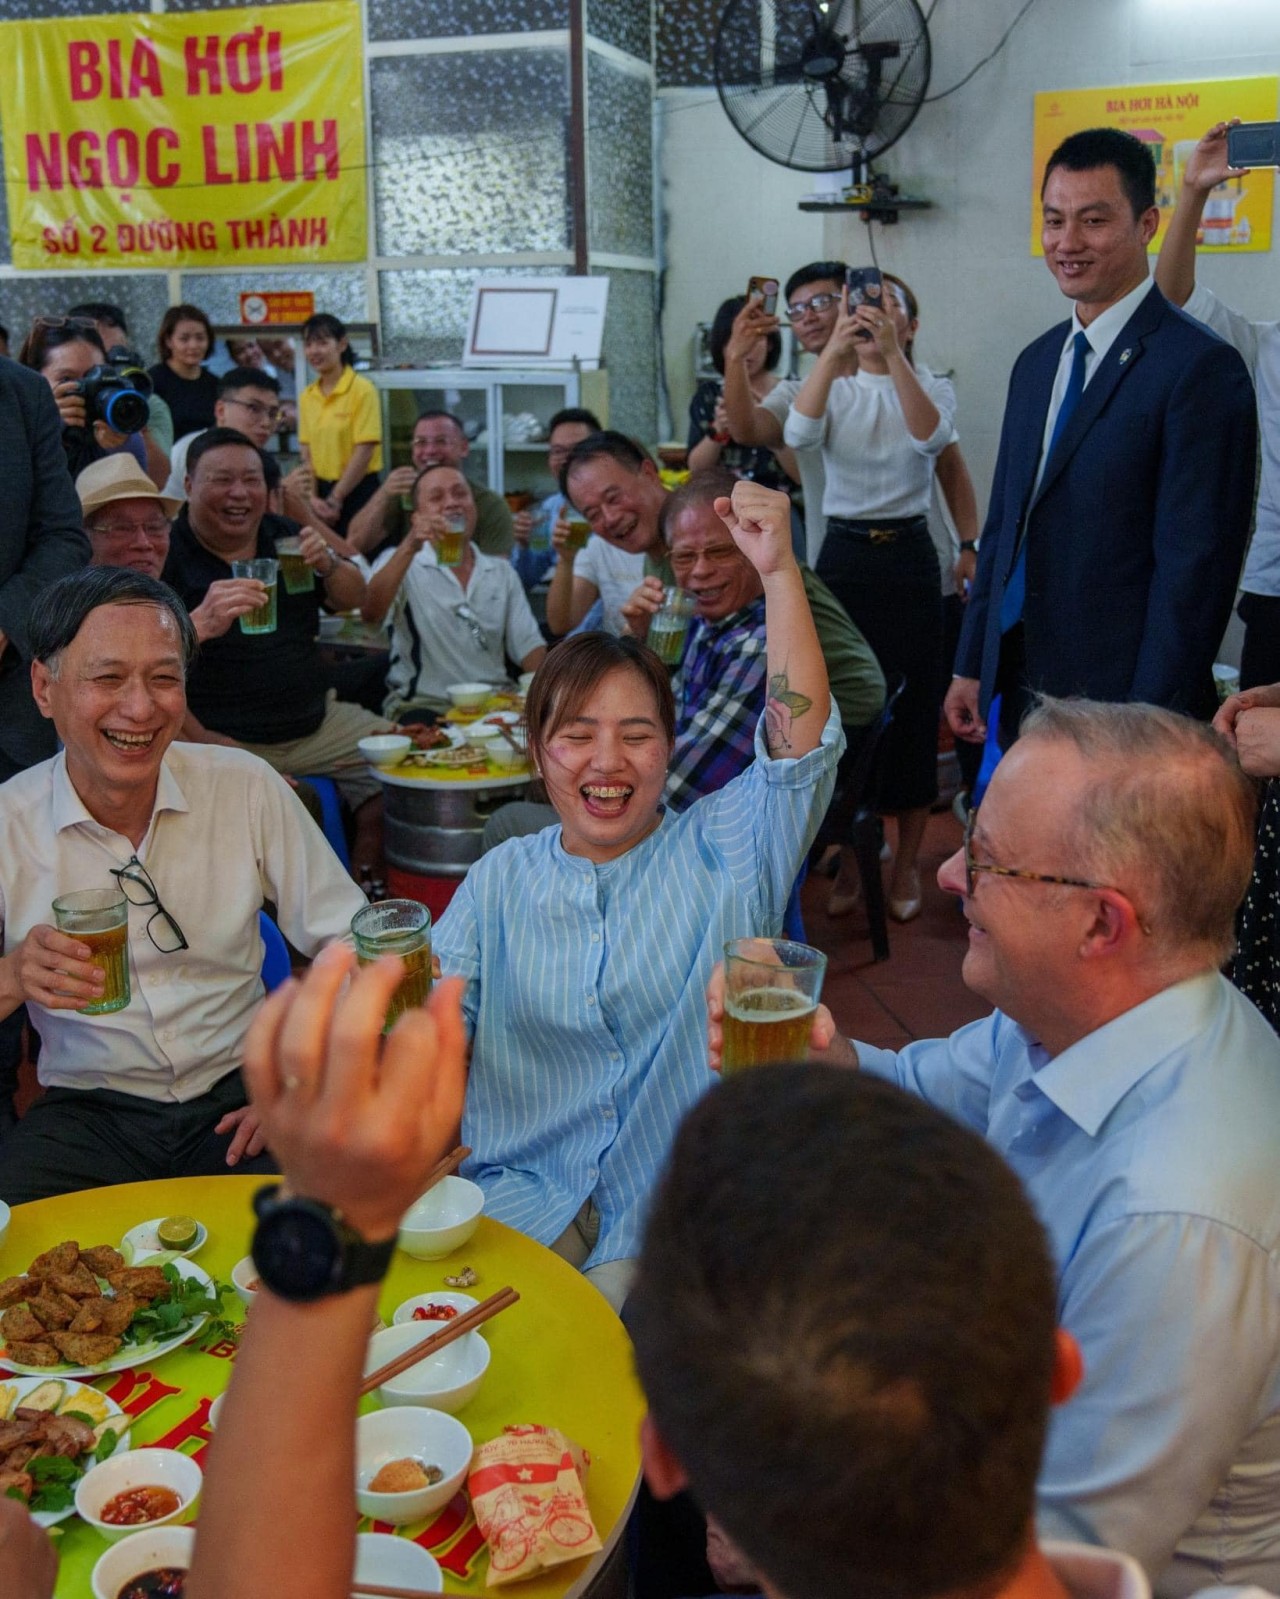 Australian Prime Minister Anthony Albanese enjoys locally brewed beer (bia hoi) with young people. Photo: Thanh Nien newspaper